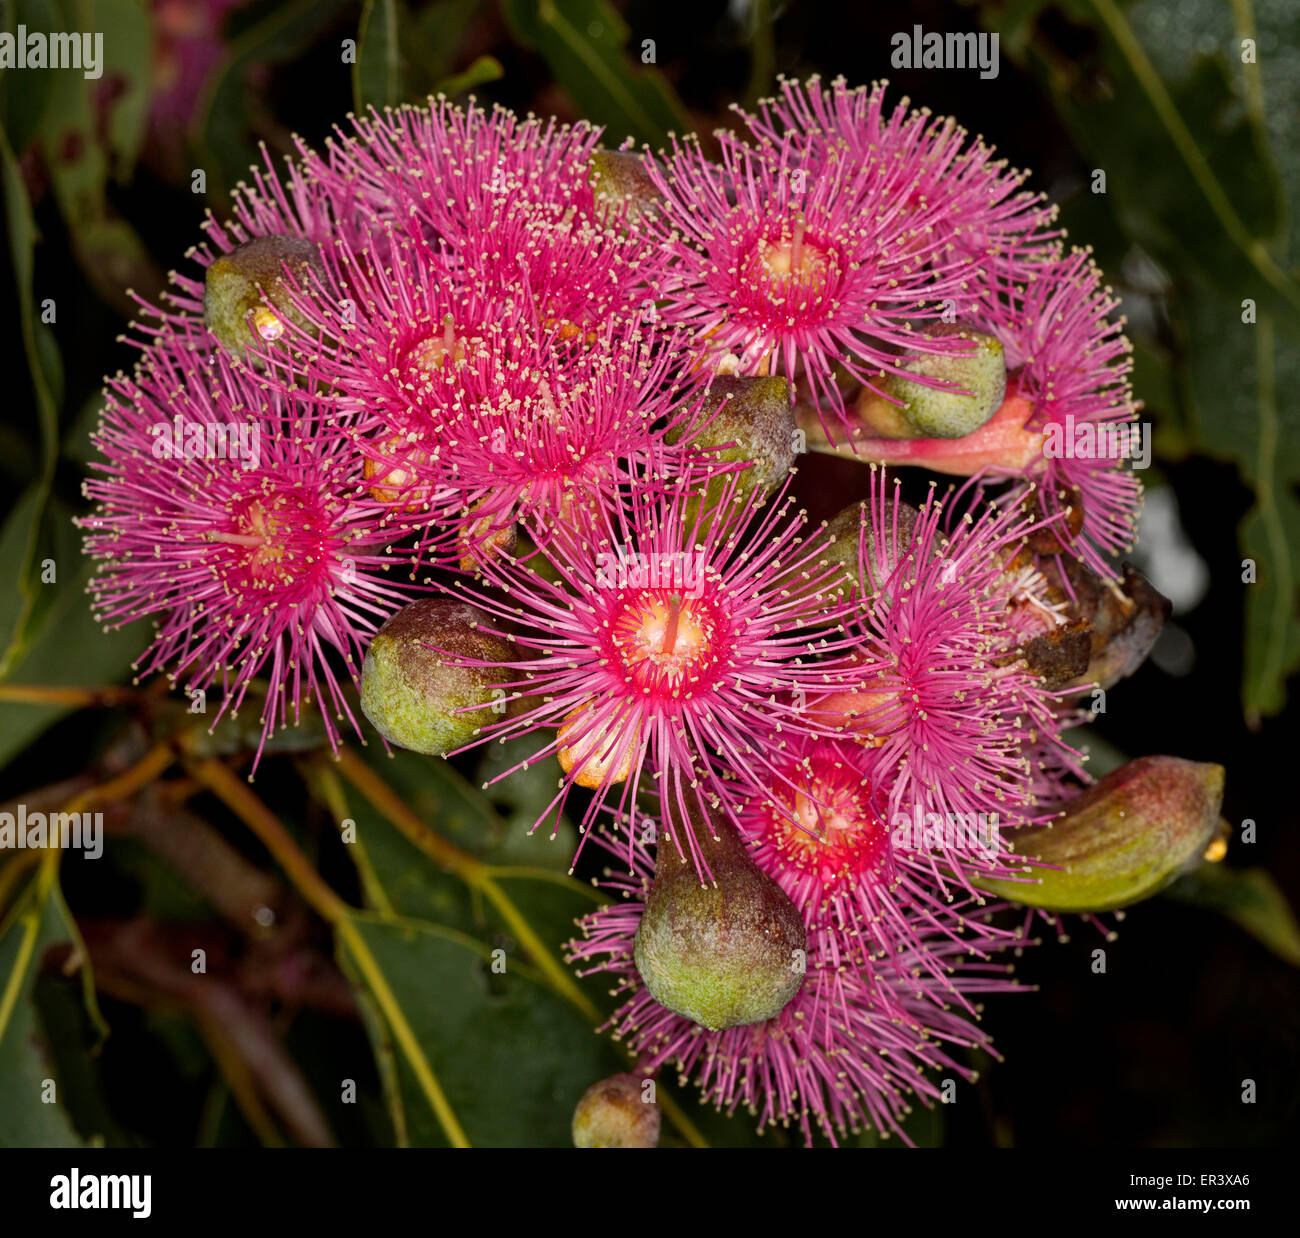 Large cluster of spectacular red flowers & buds of Australian native tree Corymbia / eucalyptus ficifolia with green leaves on dark background Stock Photo